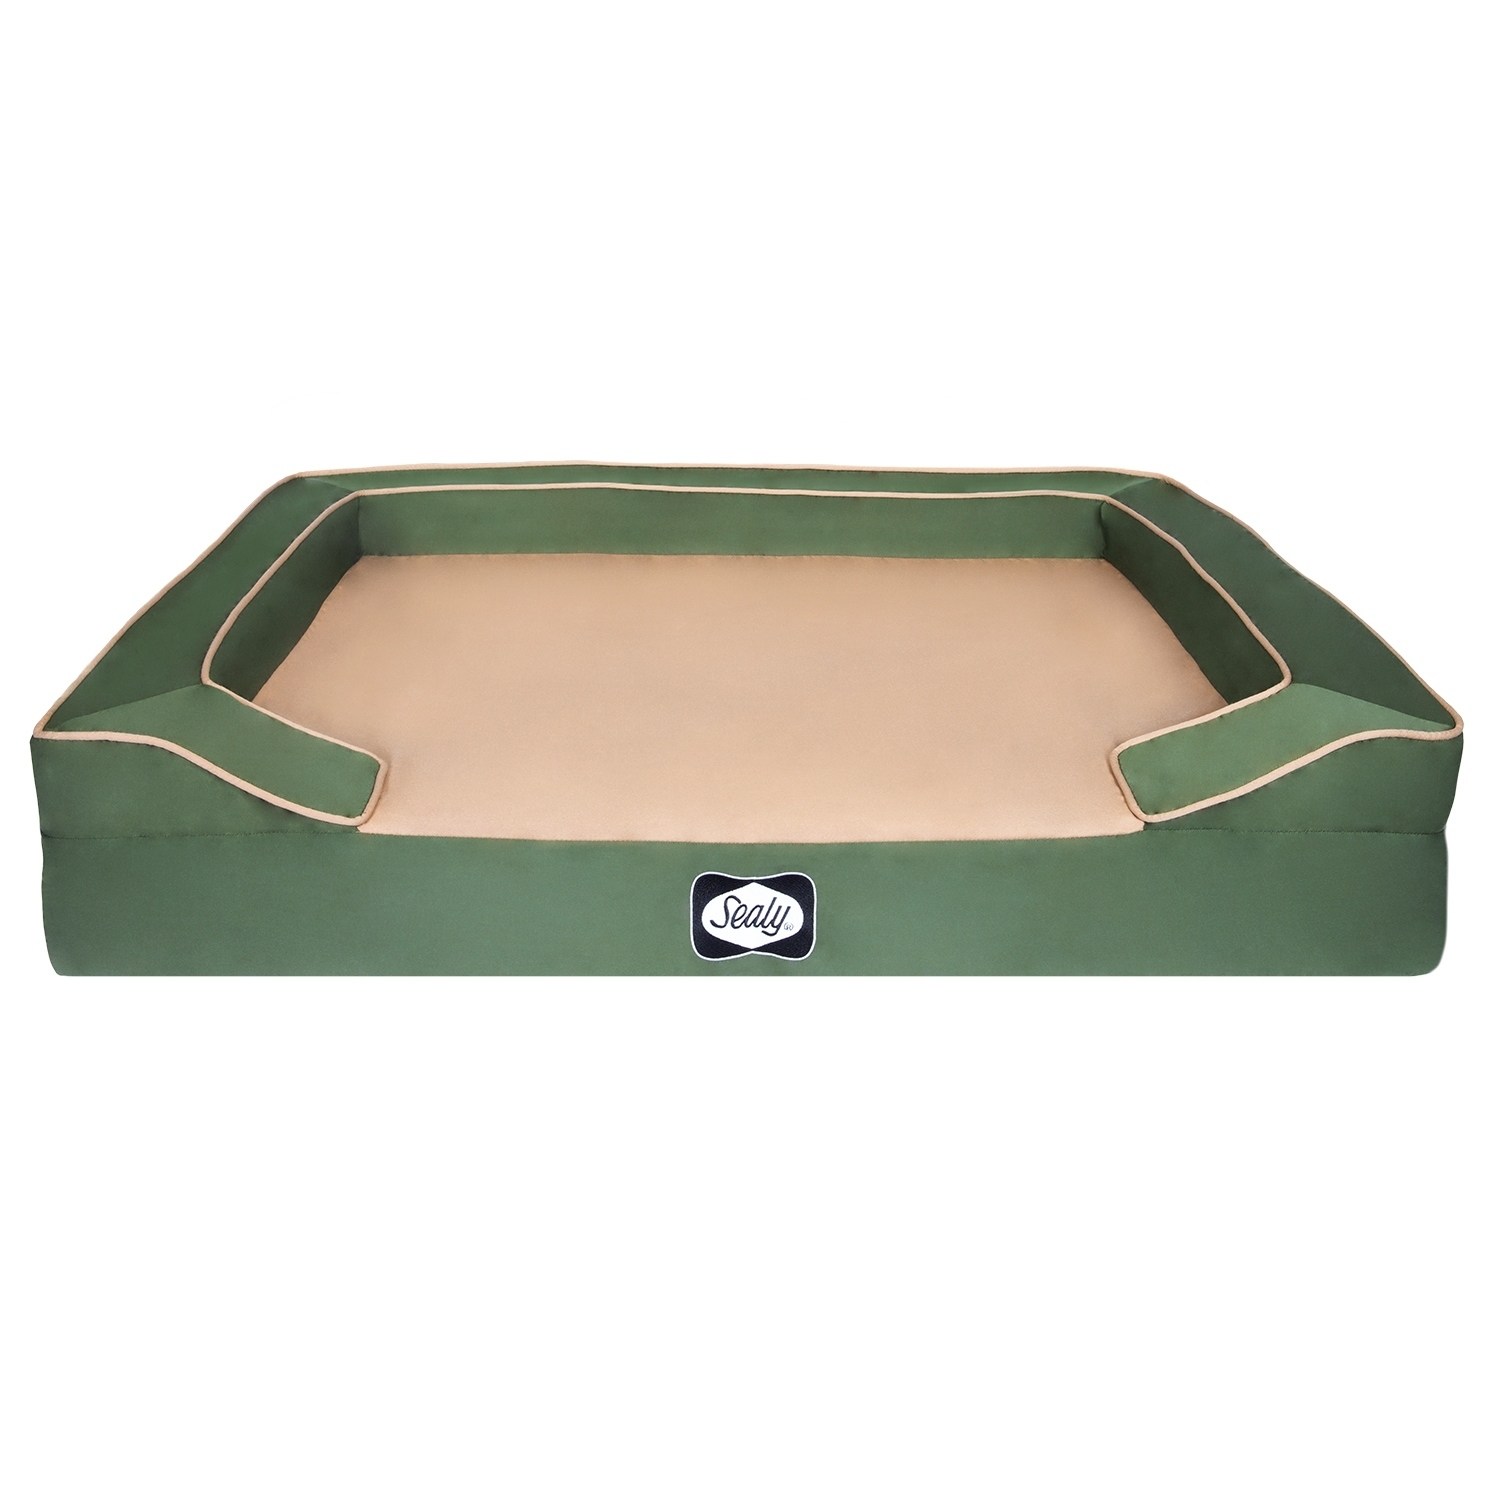 Sealy  Lux Elite Quad Element Orthopedic and Memory Foam Dog Bed - image 4 of 4